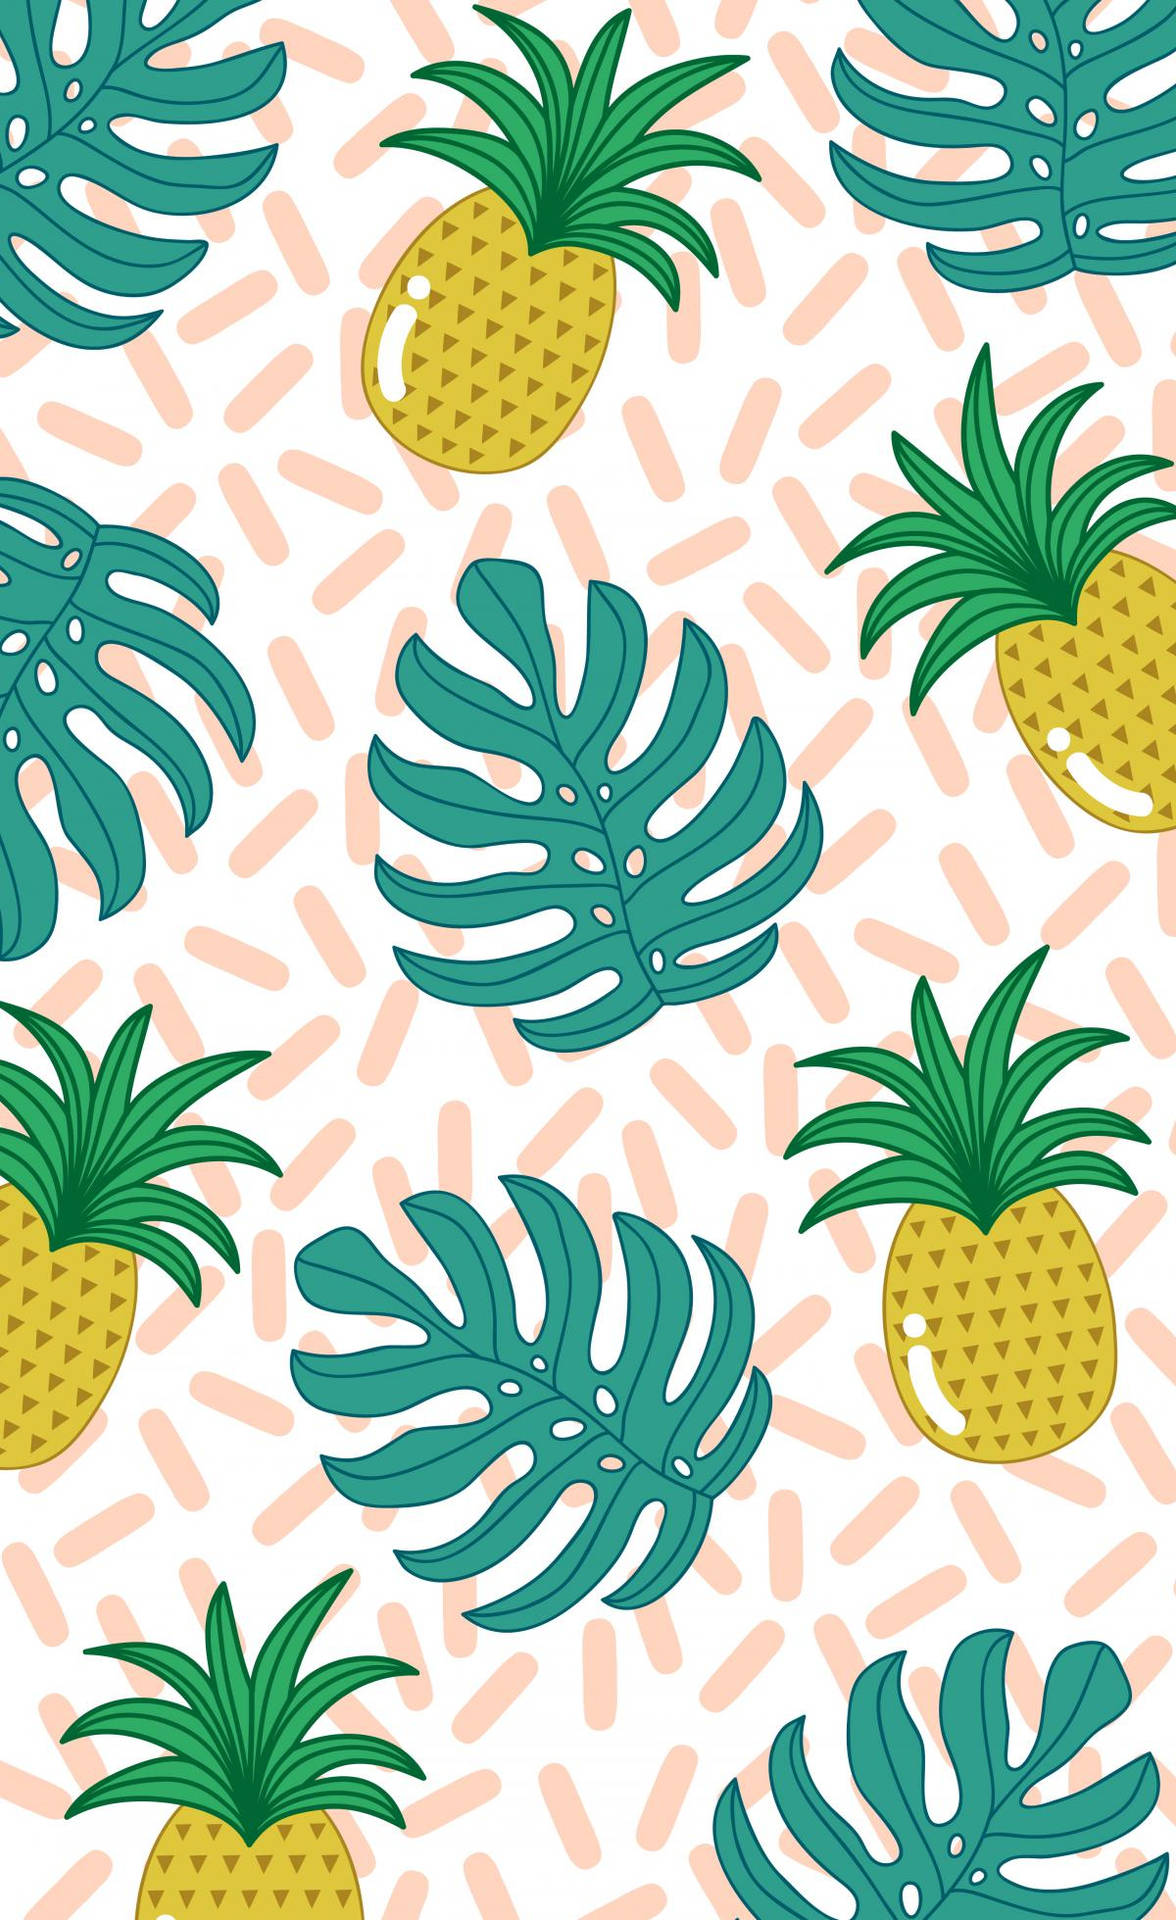 Vibrant summer vibes with this refreshing pineapple. Wallpaper